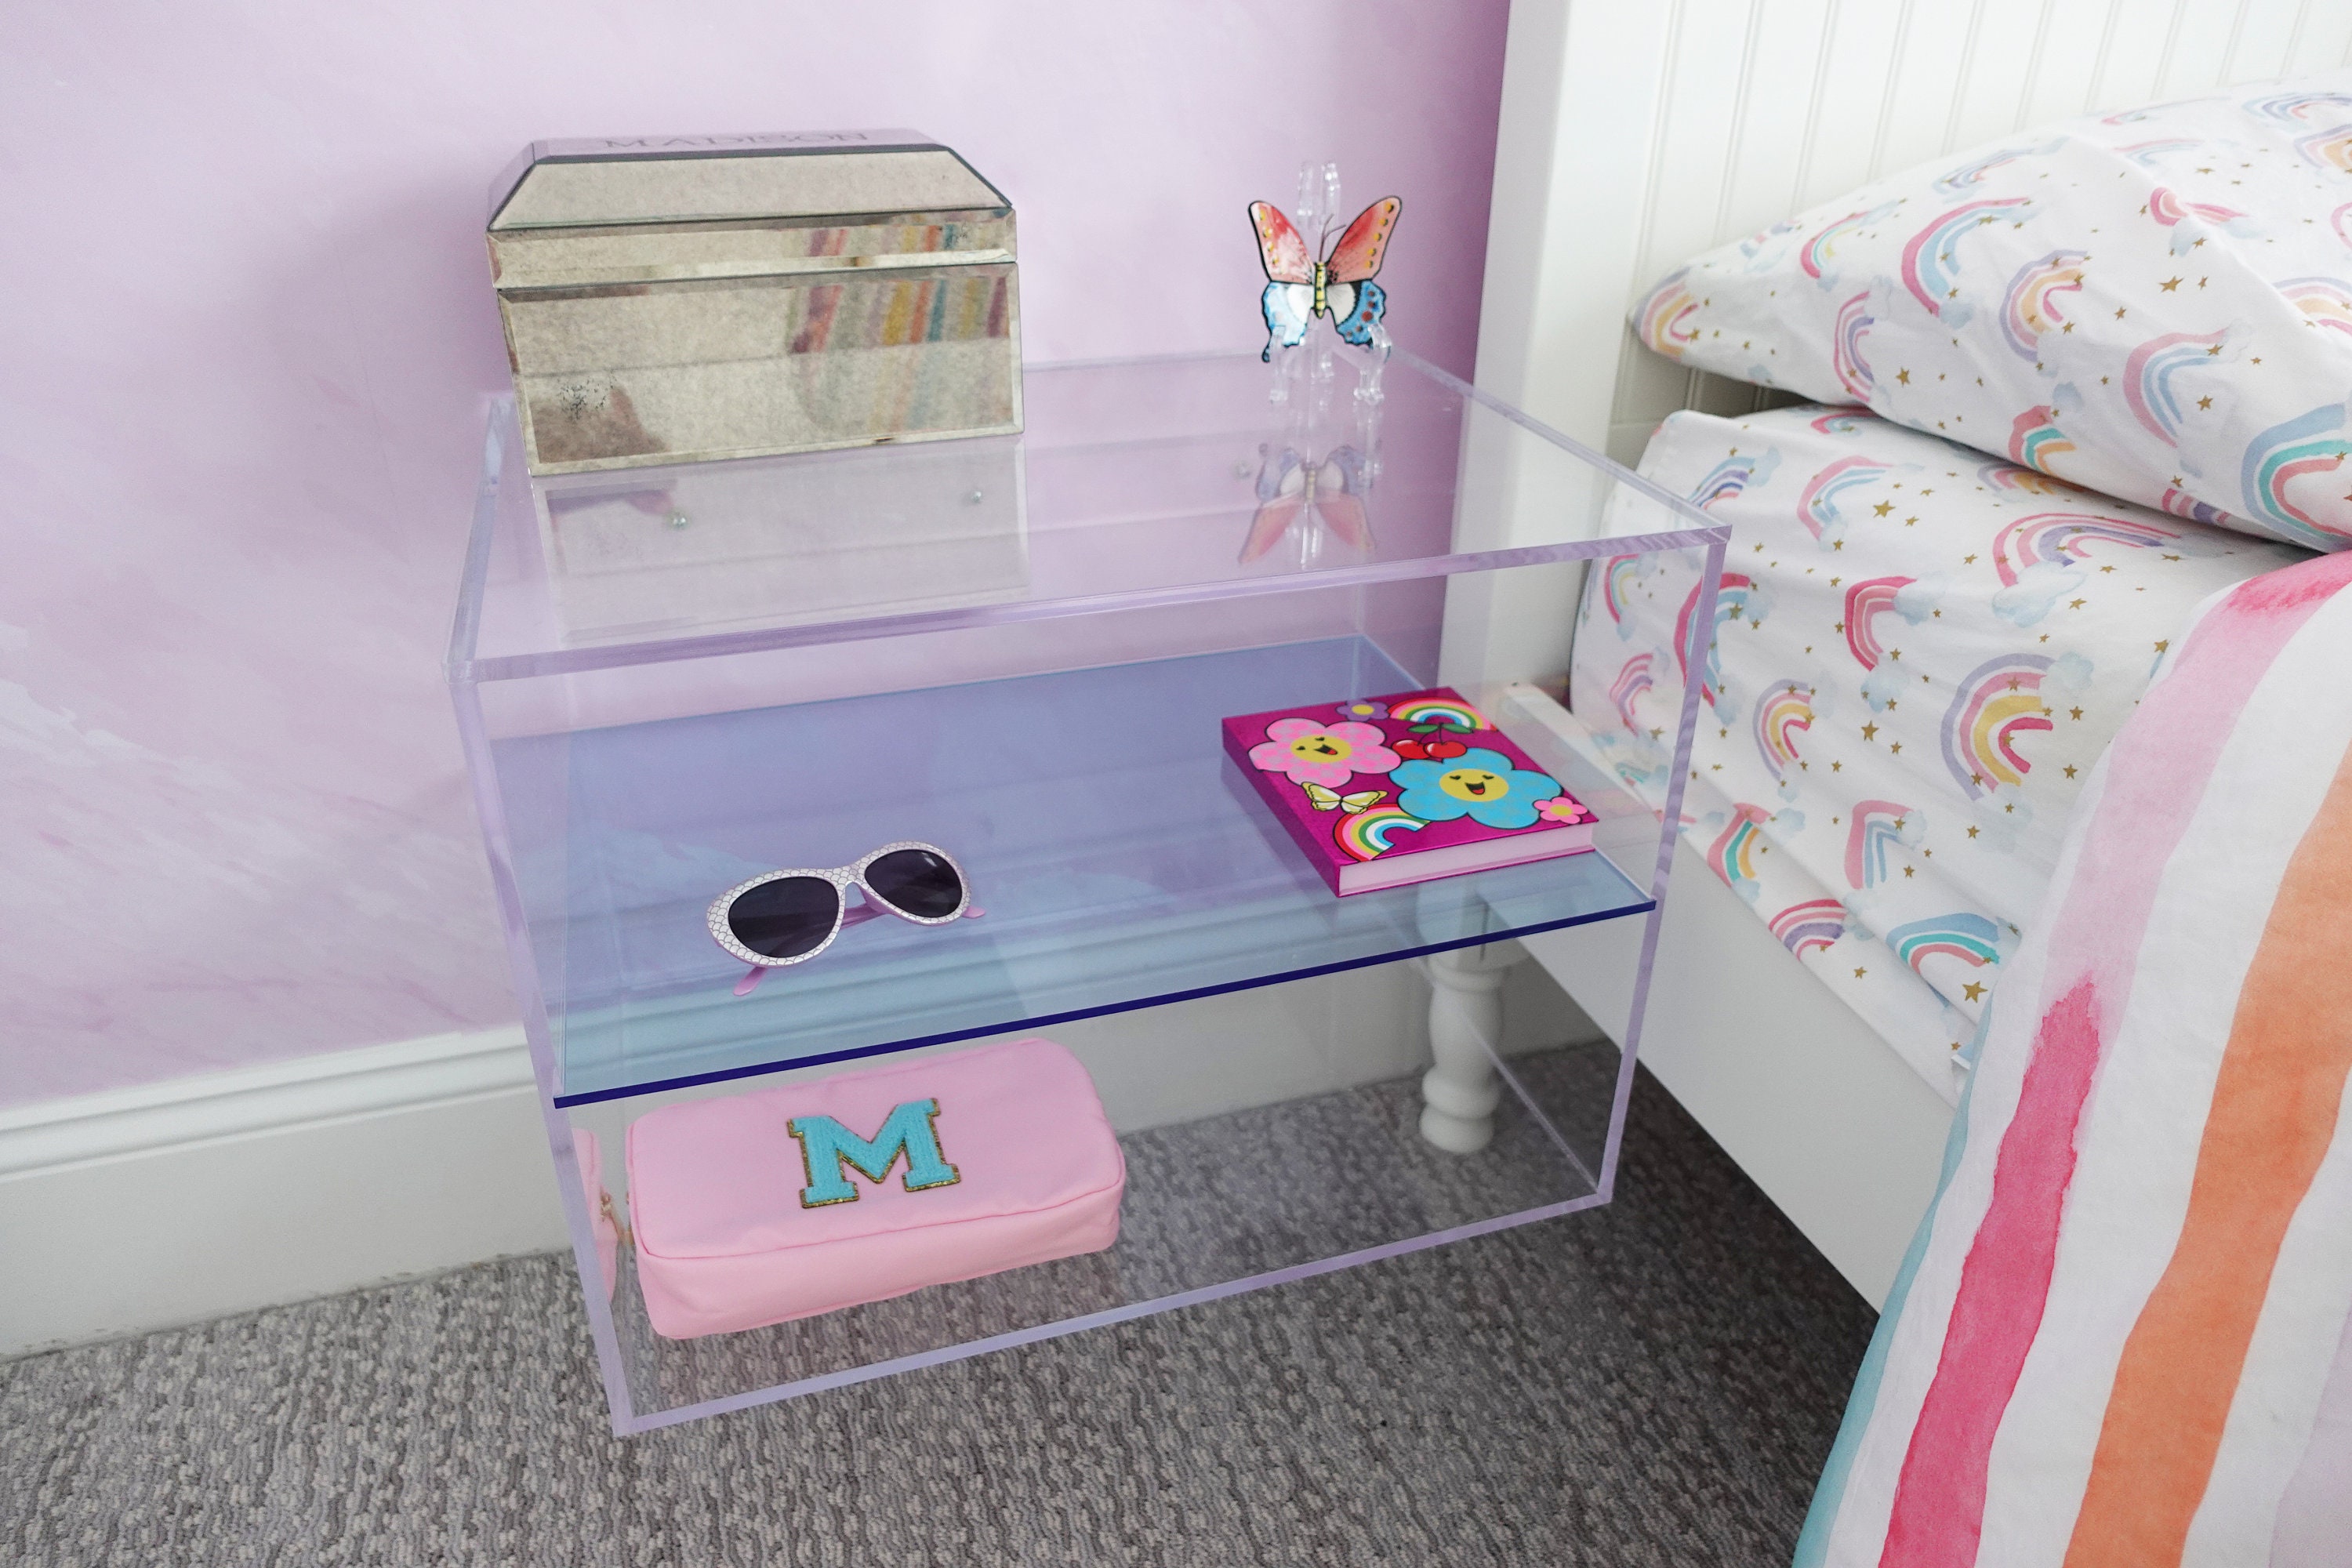 Clear Acrylic Nightstand with 1 Clear Storage Drawer